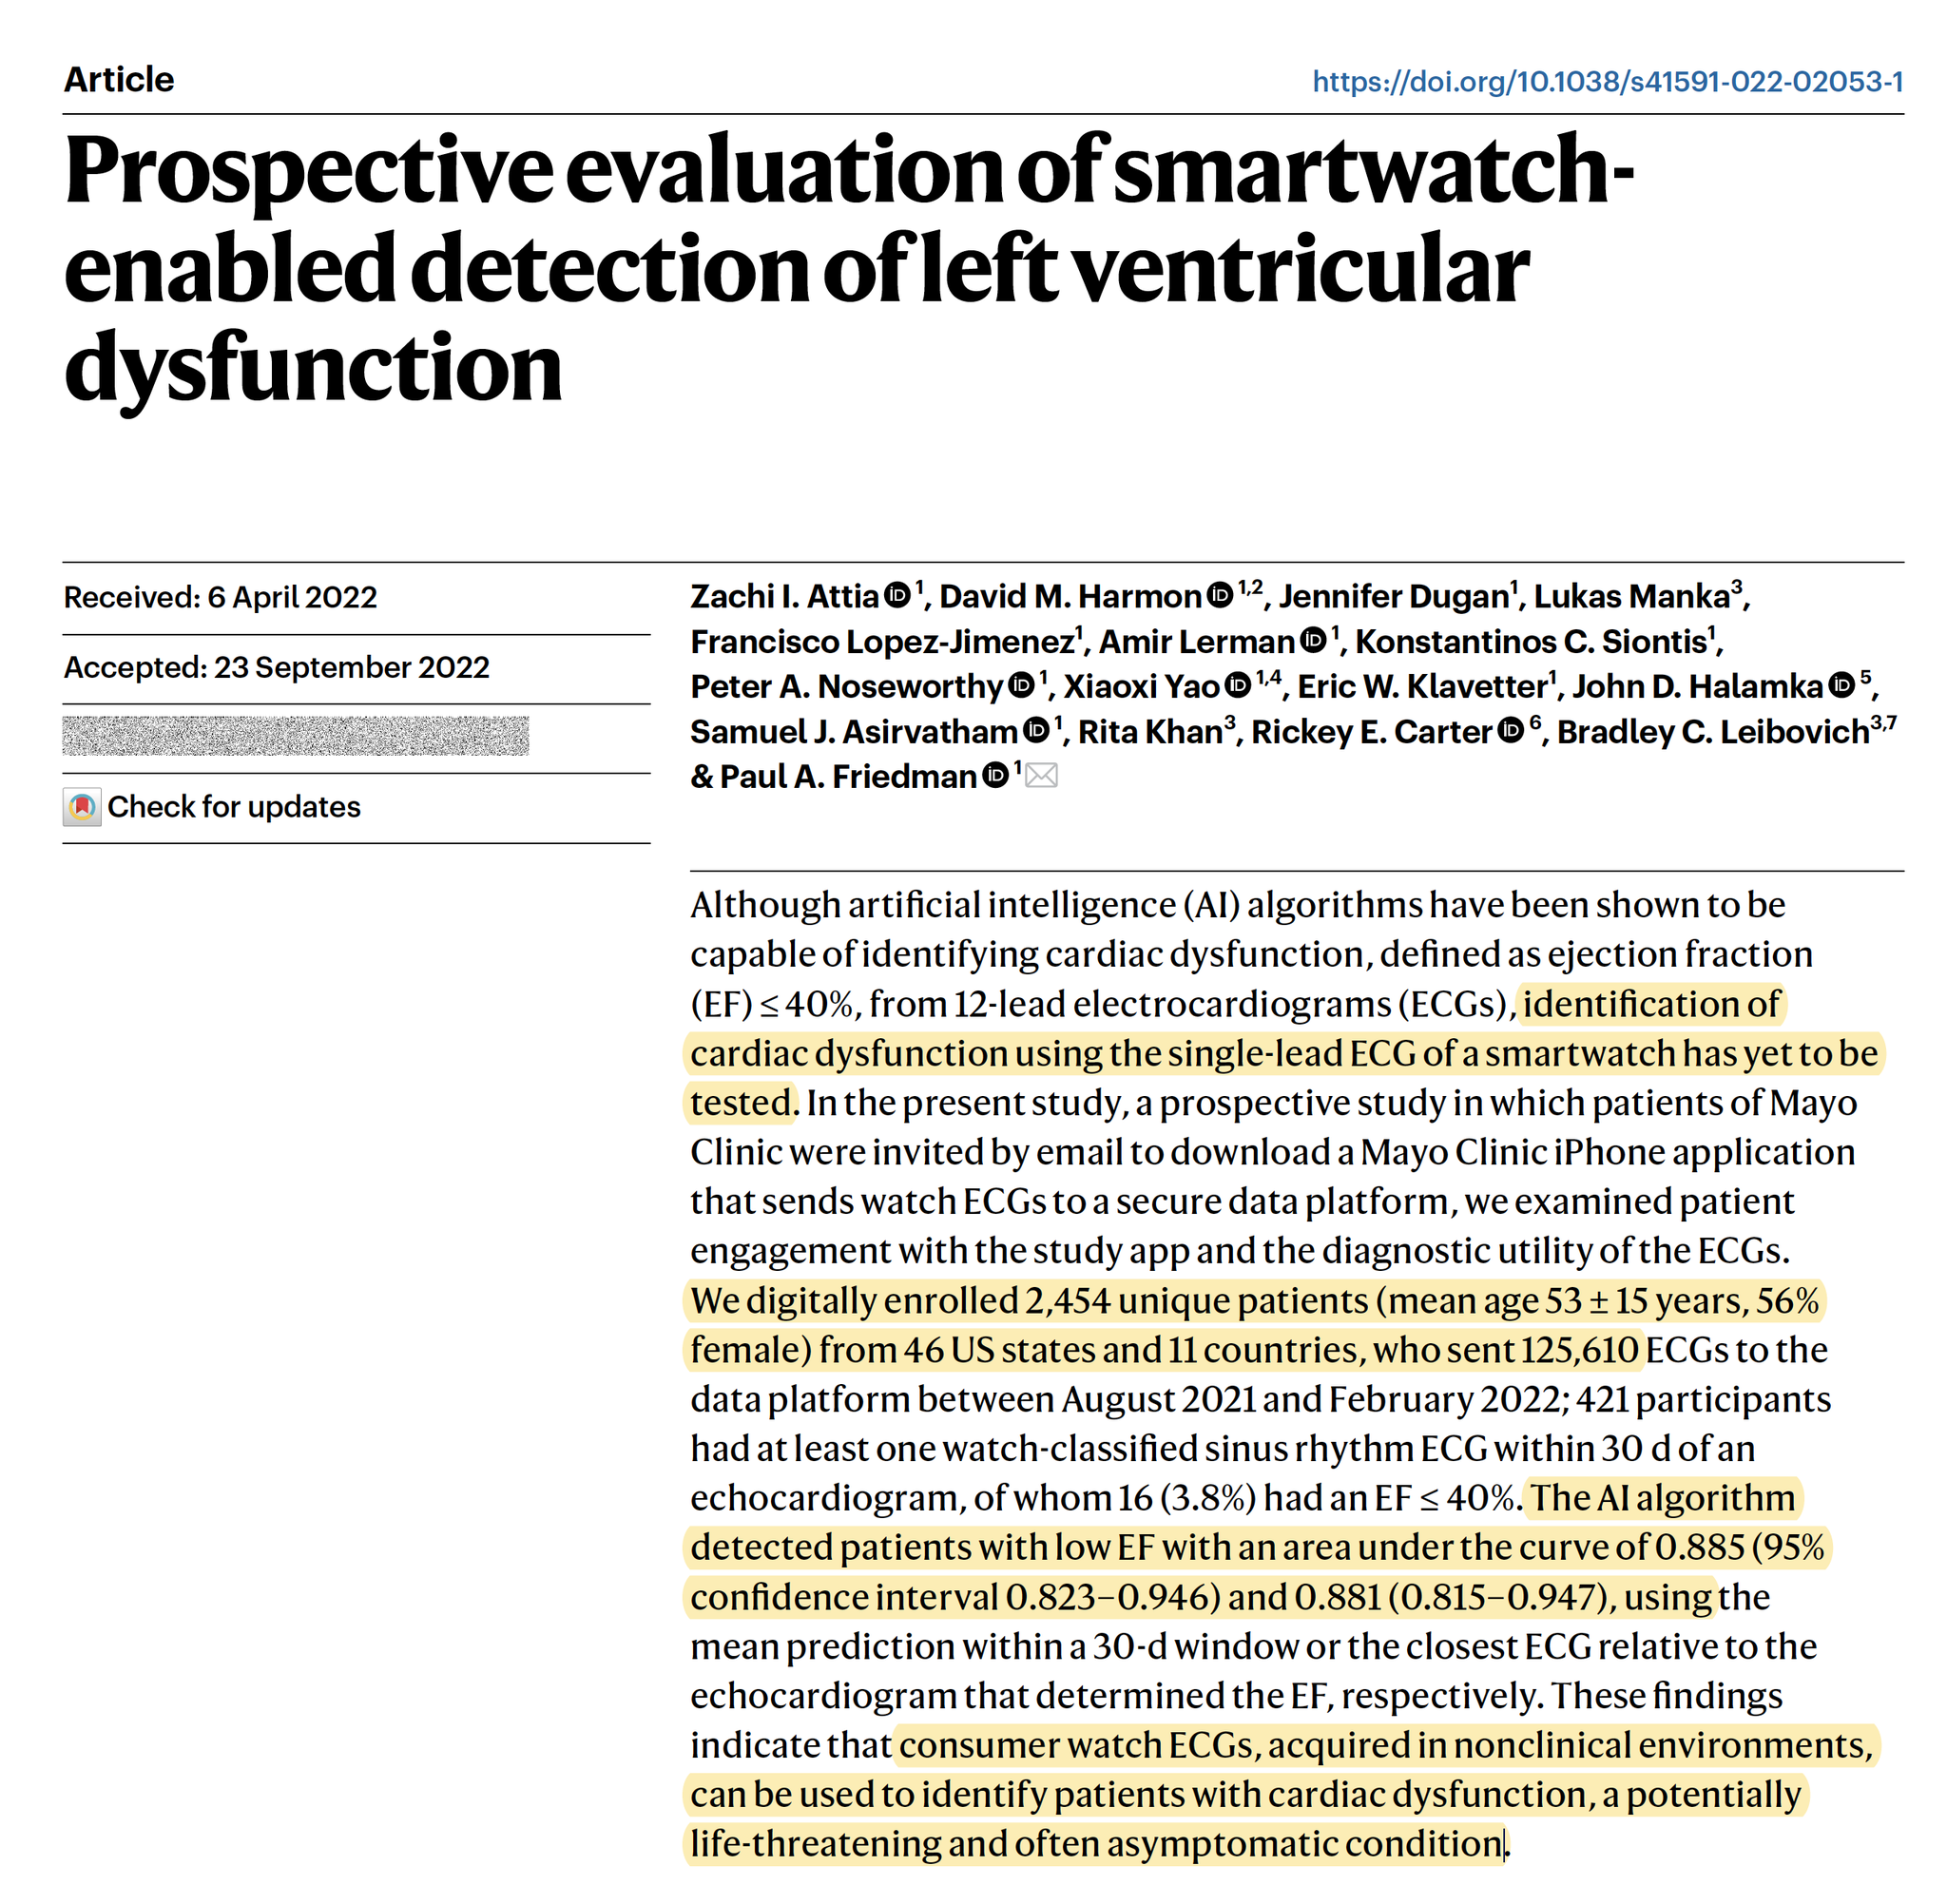 HRS 22: AI To Identify LV Dysfunction From Smartwatch ECGs